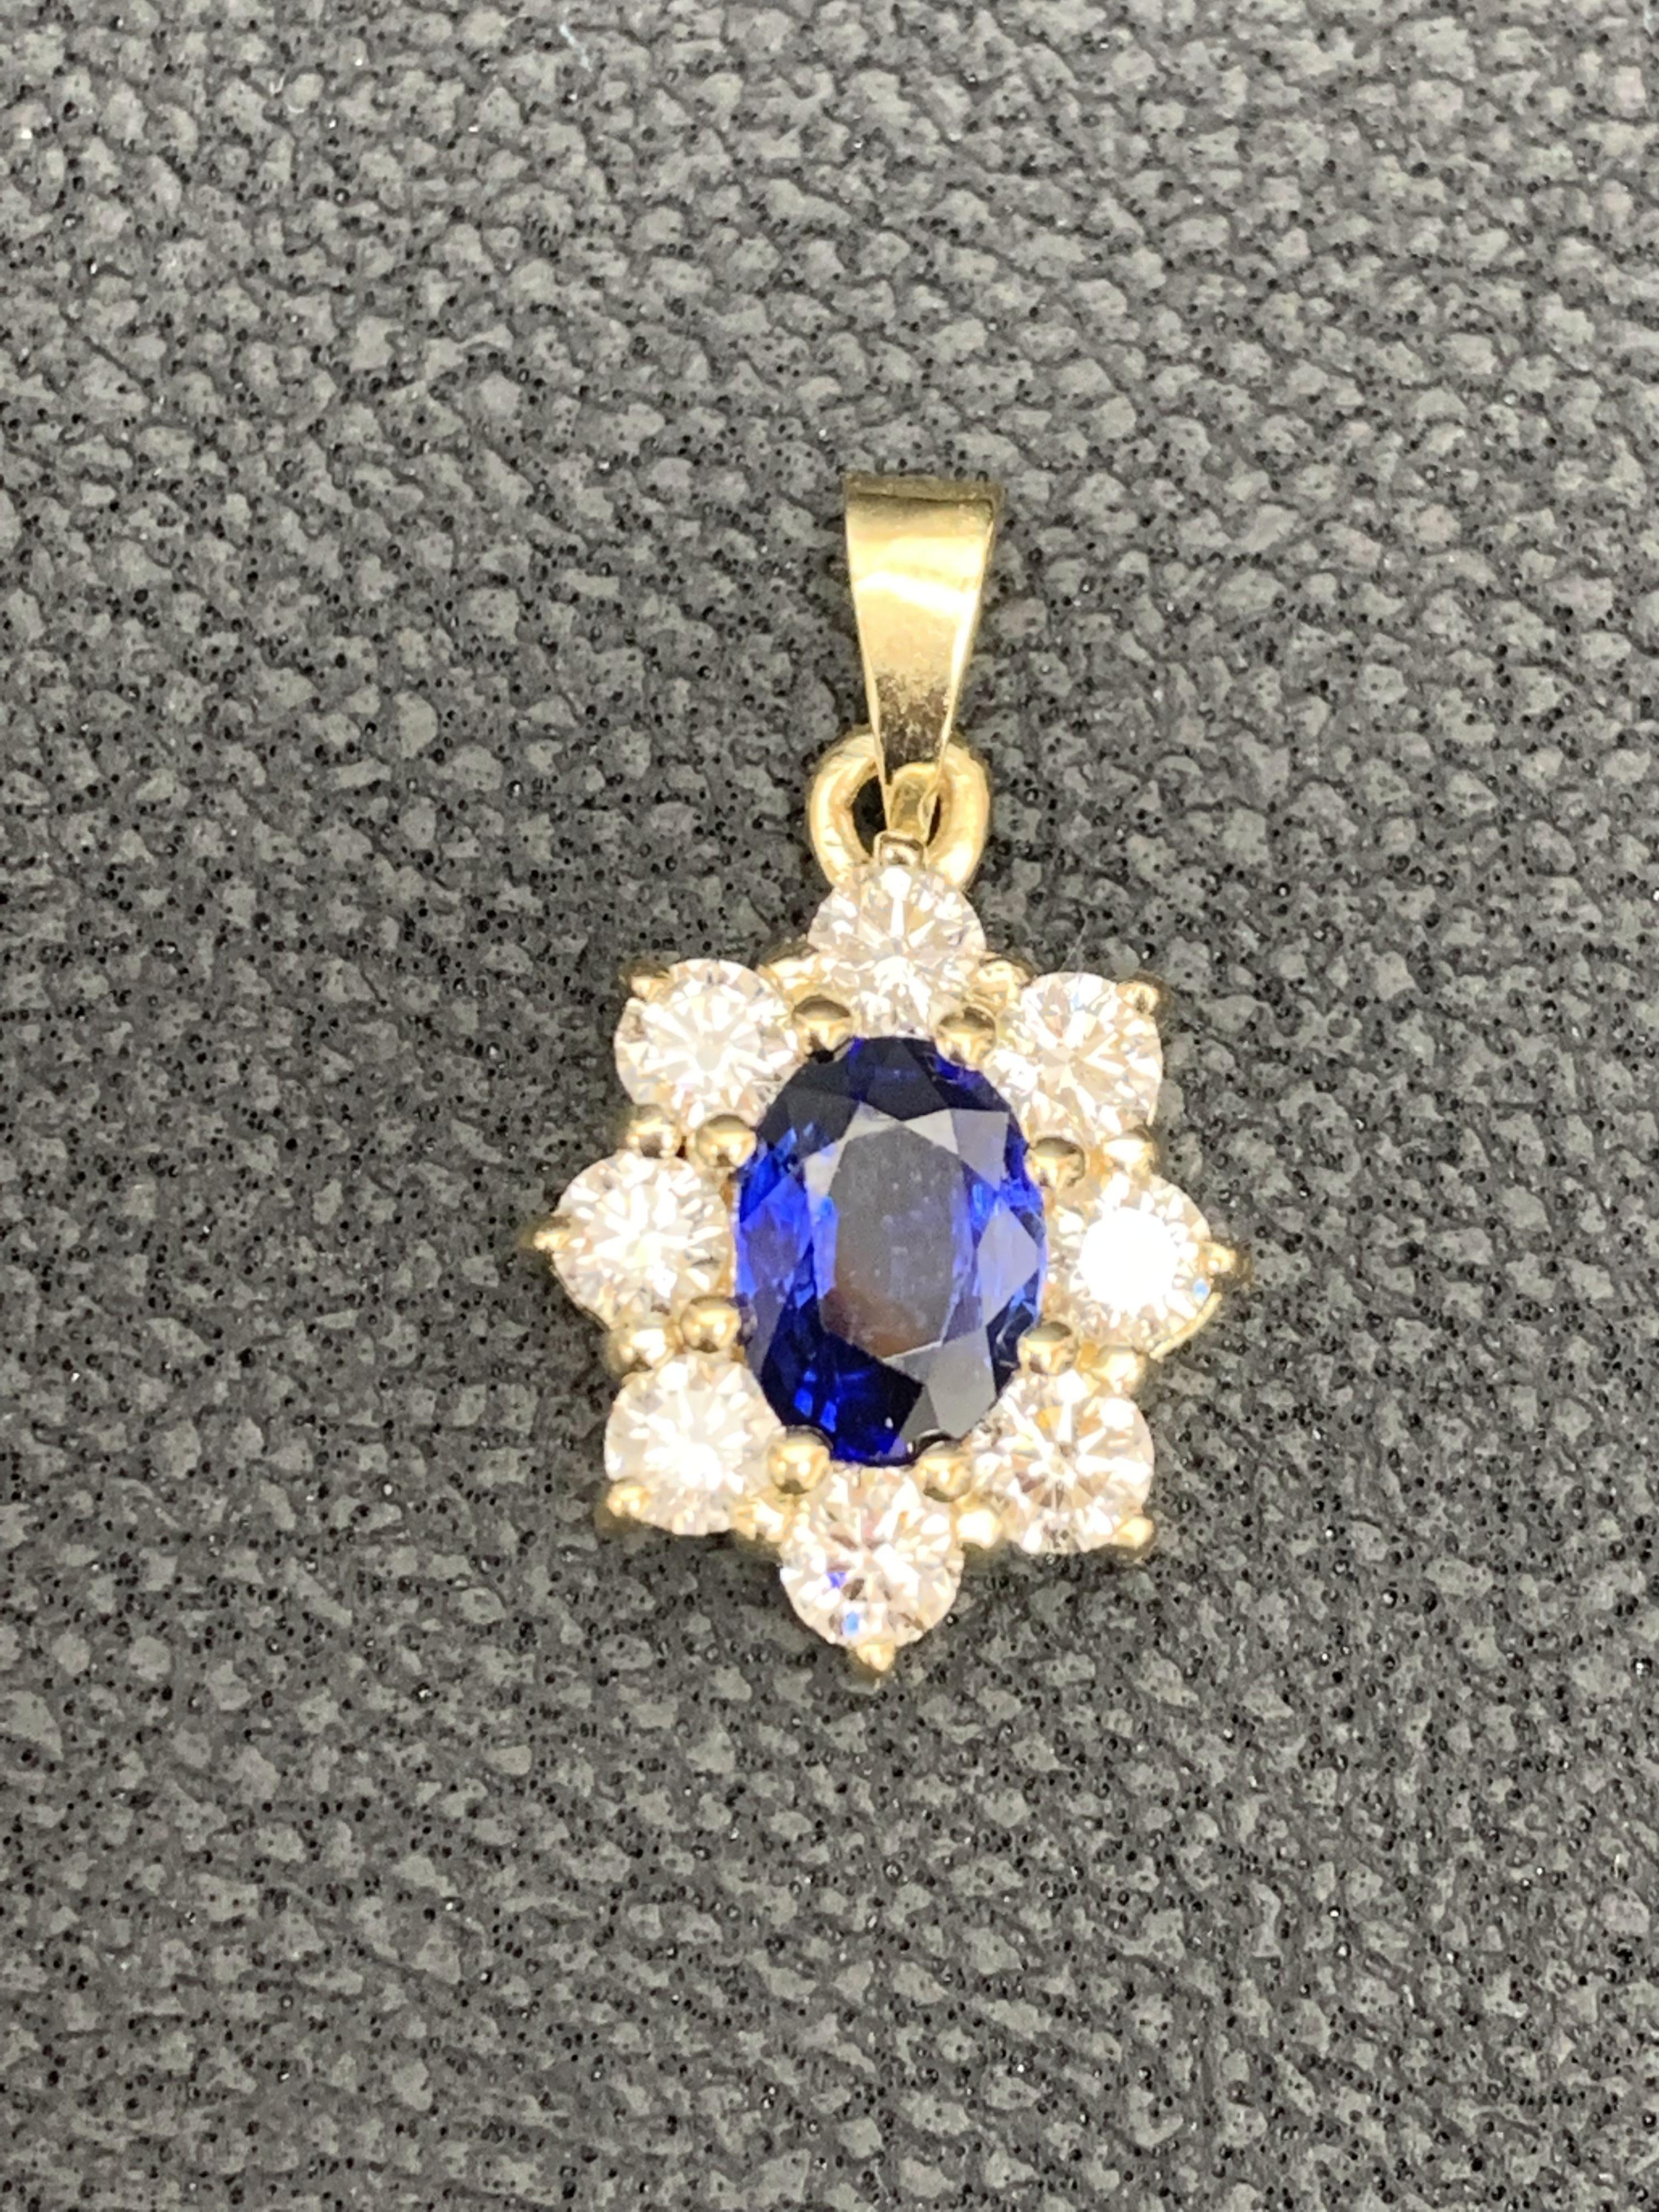 A simple floral motif pendant necklace showcasing a vibrant 0.85-carat oval cut blue sapphire, surrounded by 0.75 carats of 8 round diamonds. Made in 14 karats yellow gold.

Style available in different price ranges. Prices are based on your